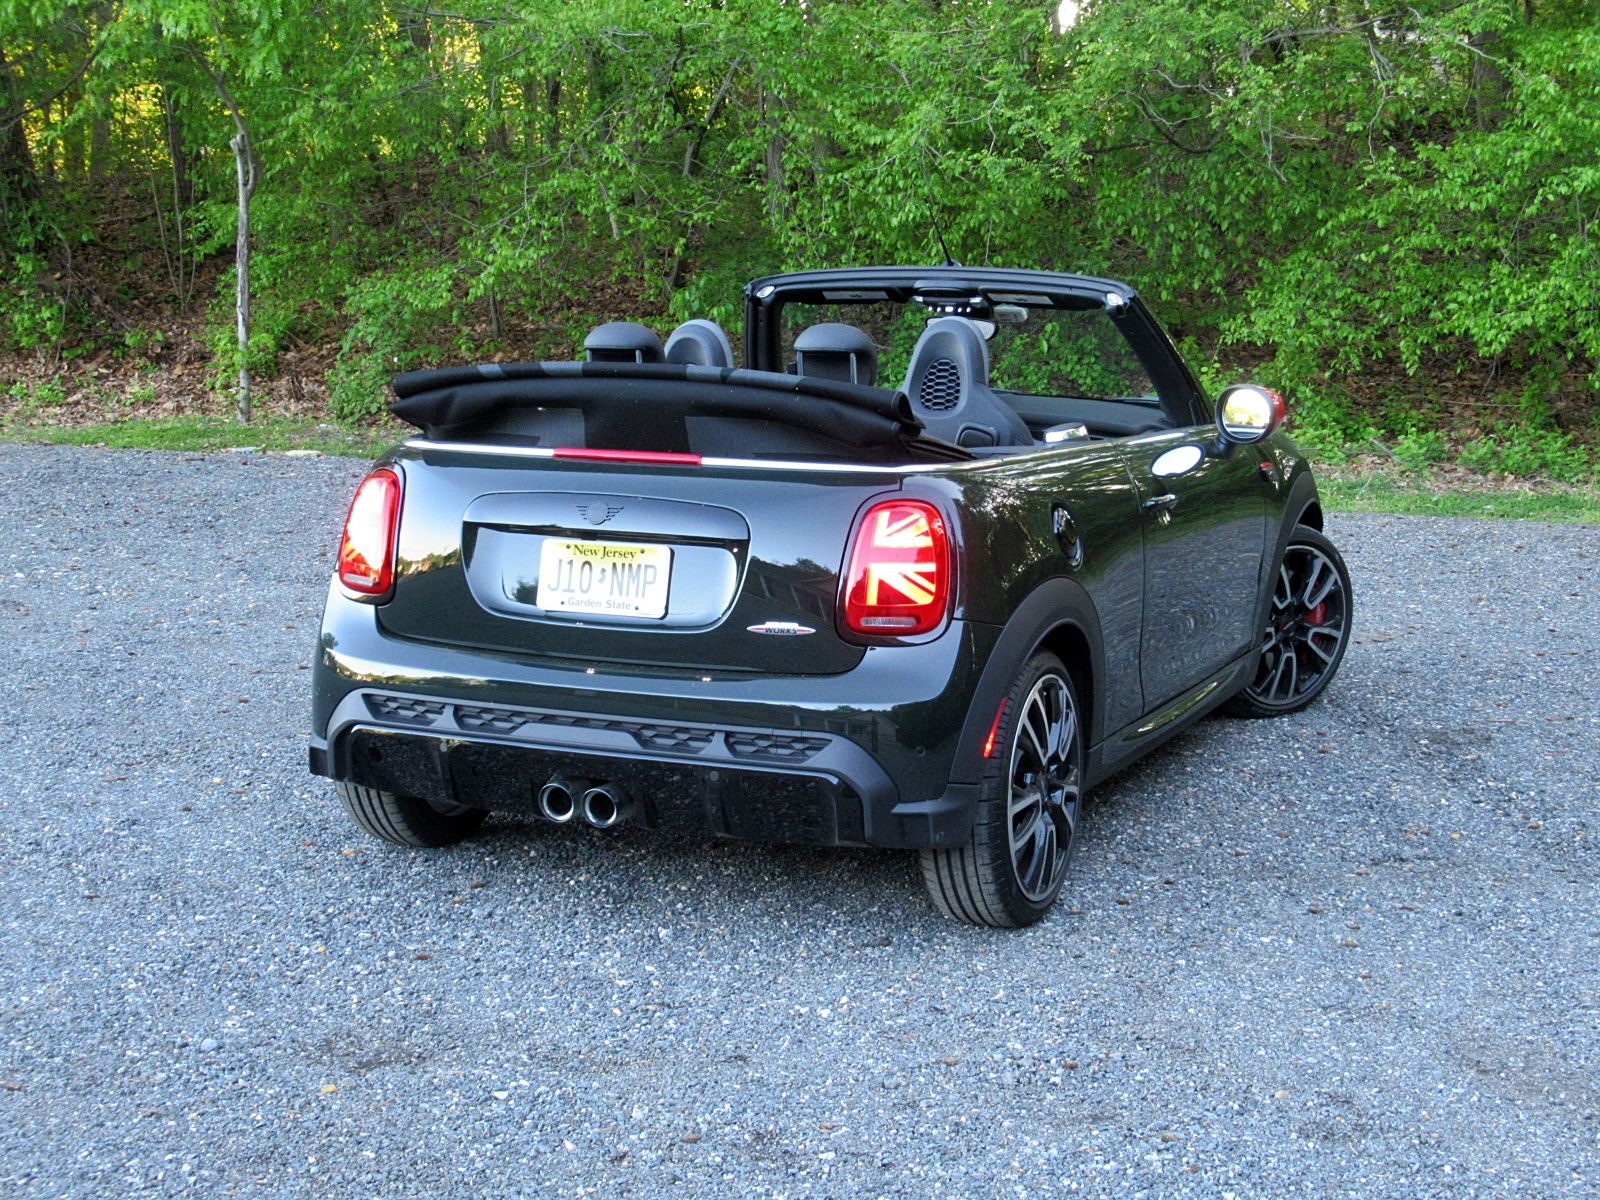 2022 2022 Mini Cooper Convertible Review: Is ‘Miata’ Really Always the Answer? 